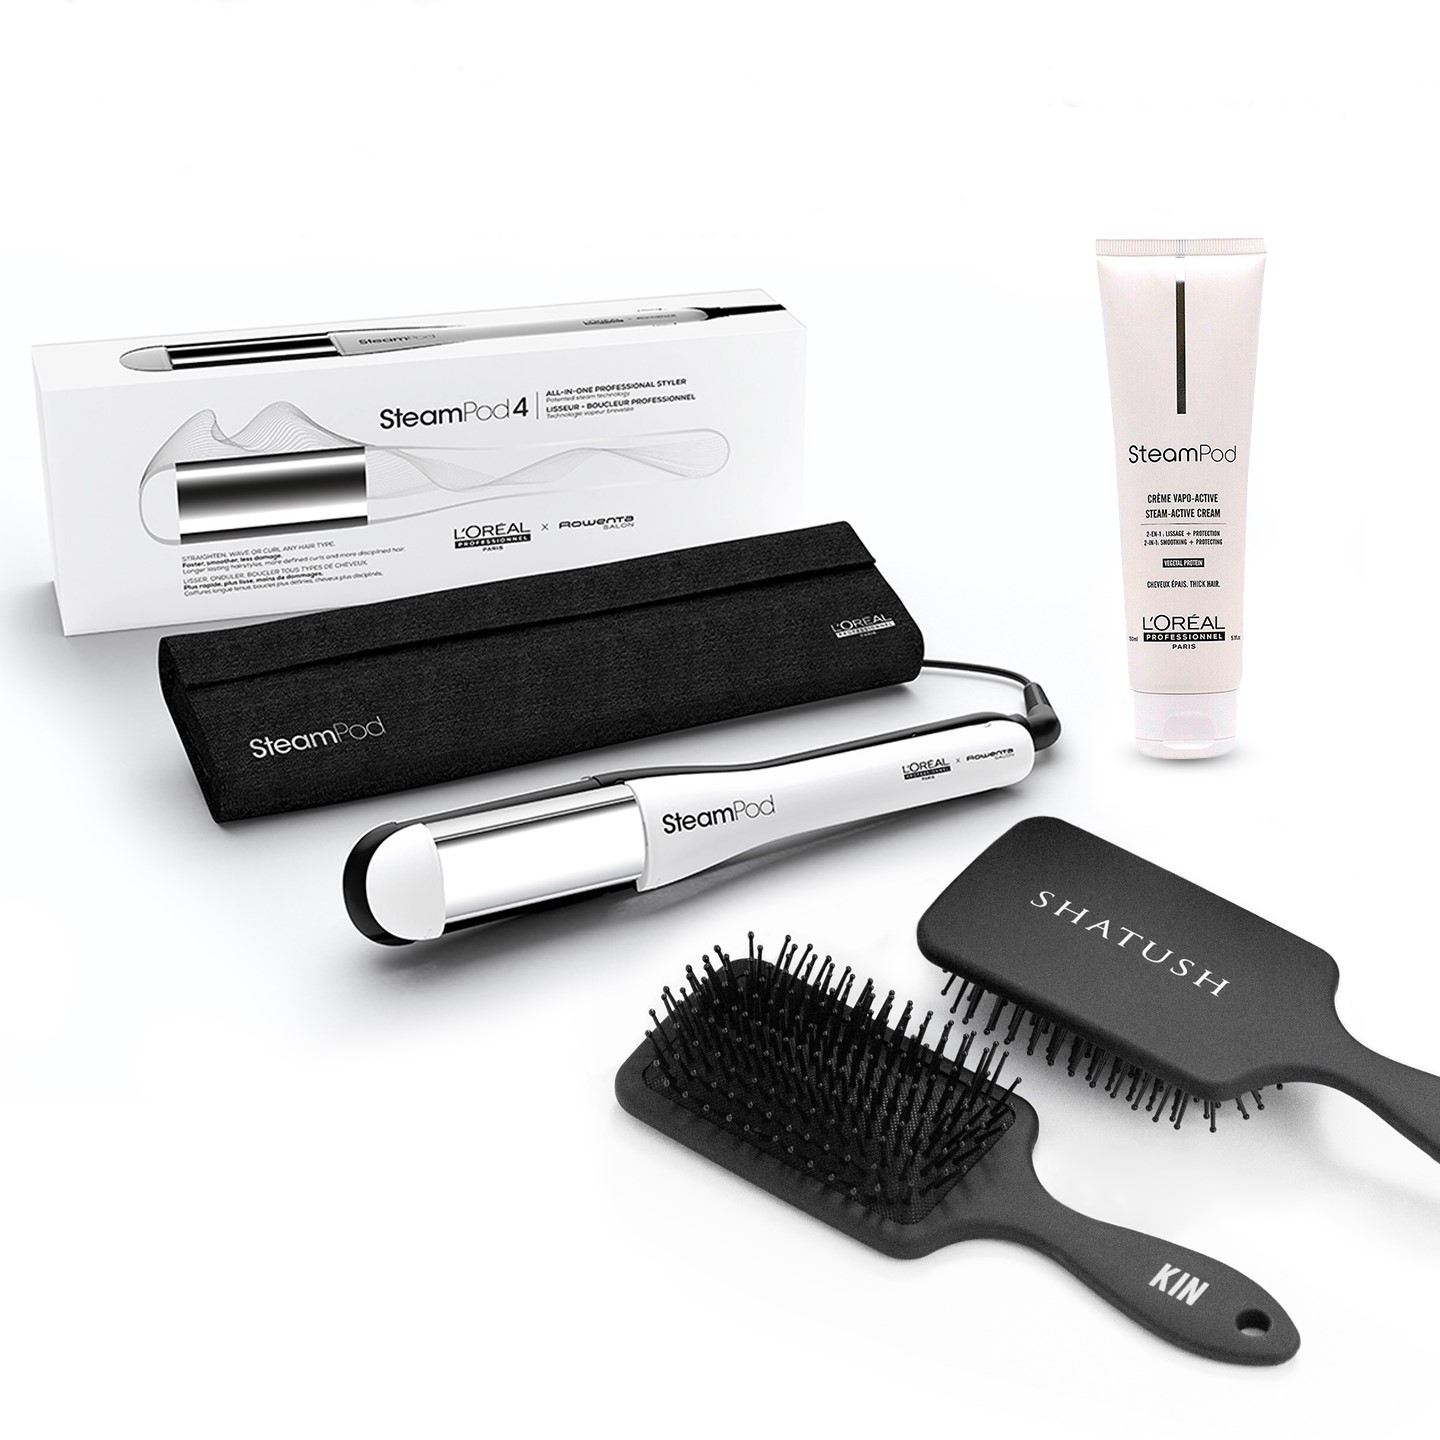 SteamPod 4 the professional steam styler by L'Oréal Professionnel